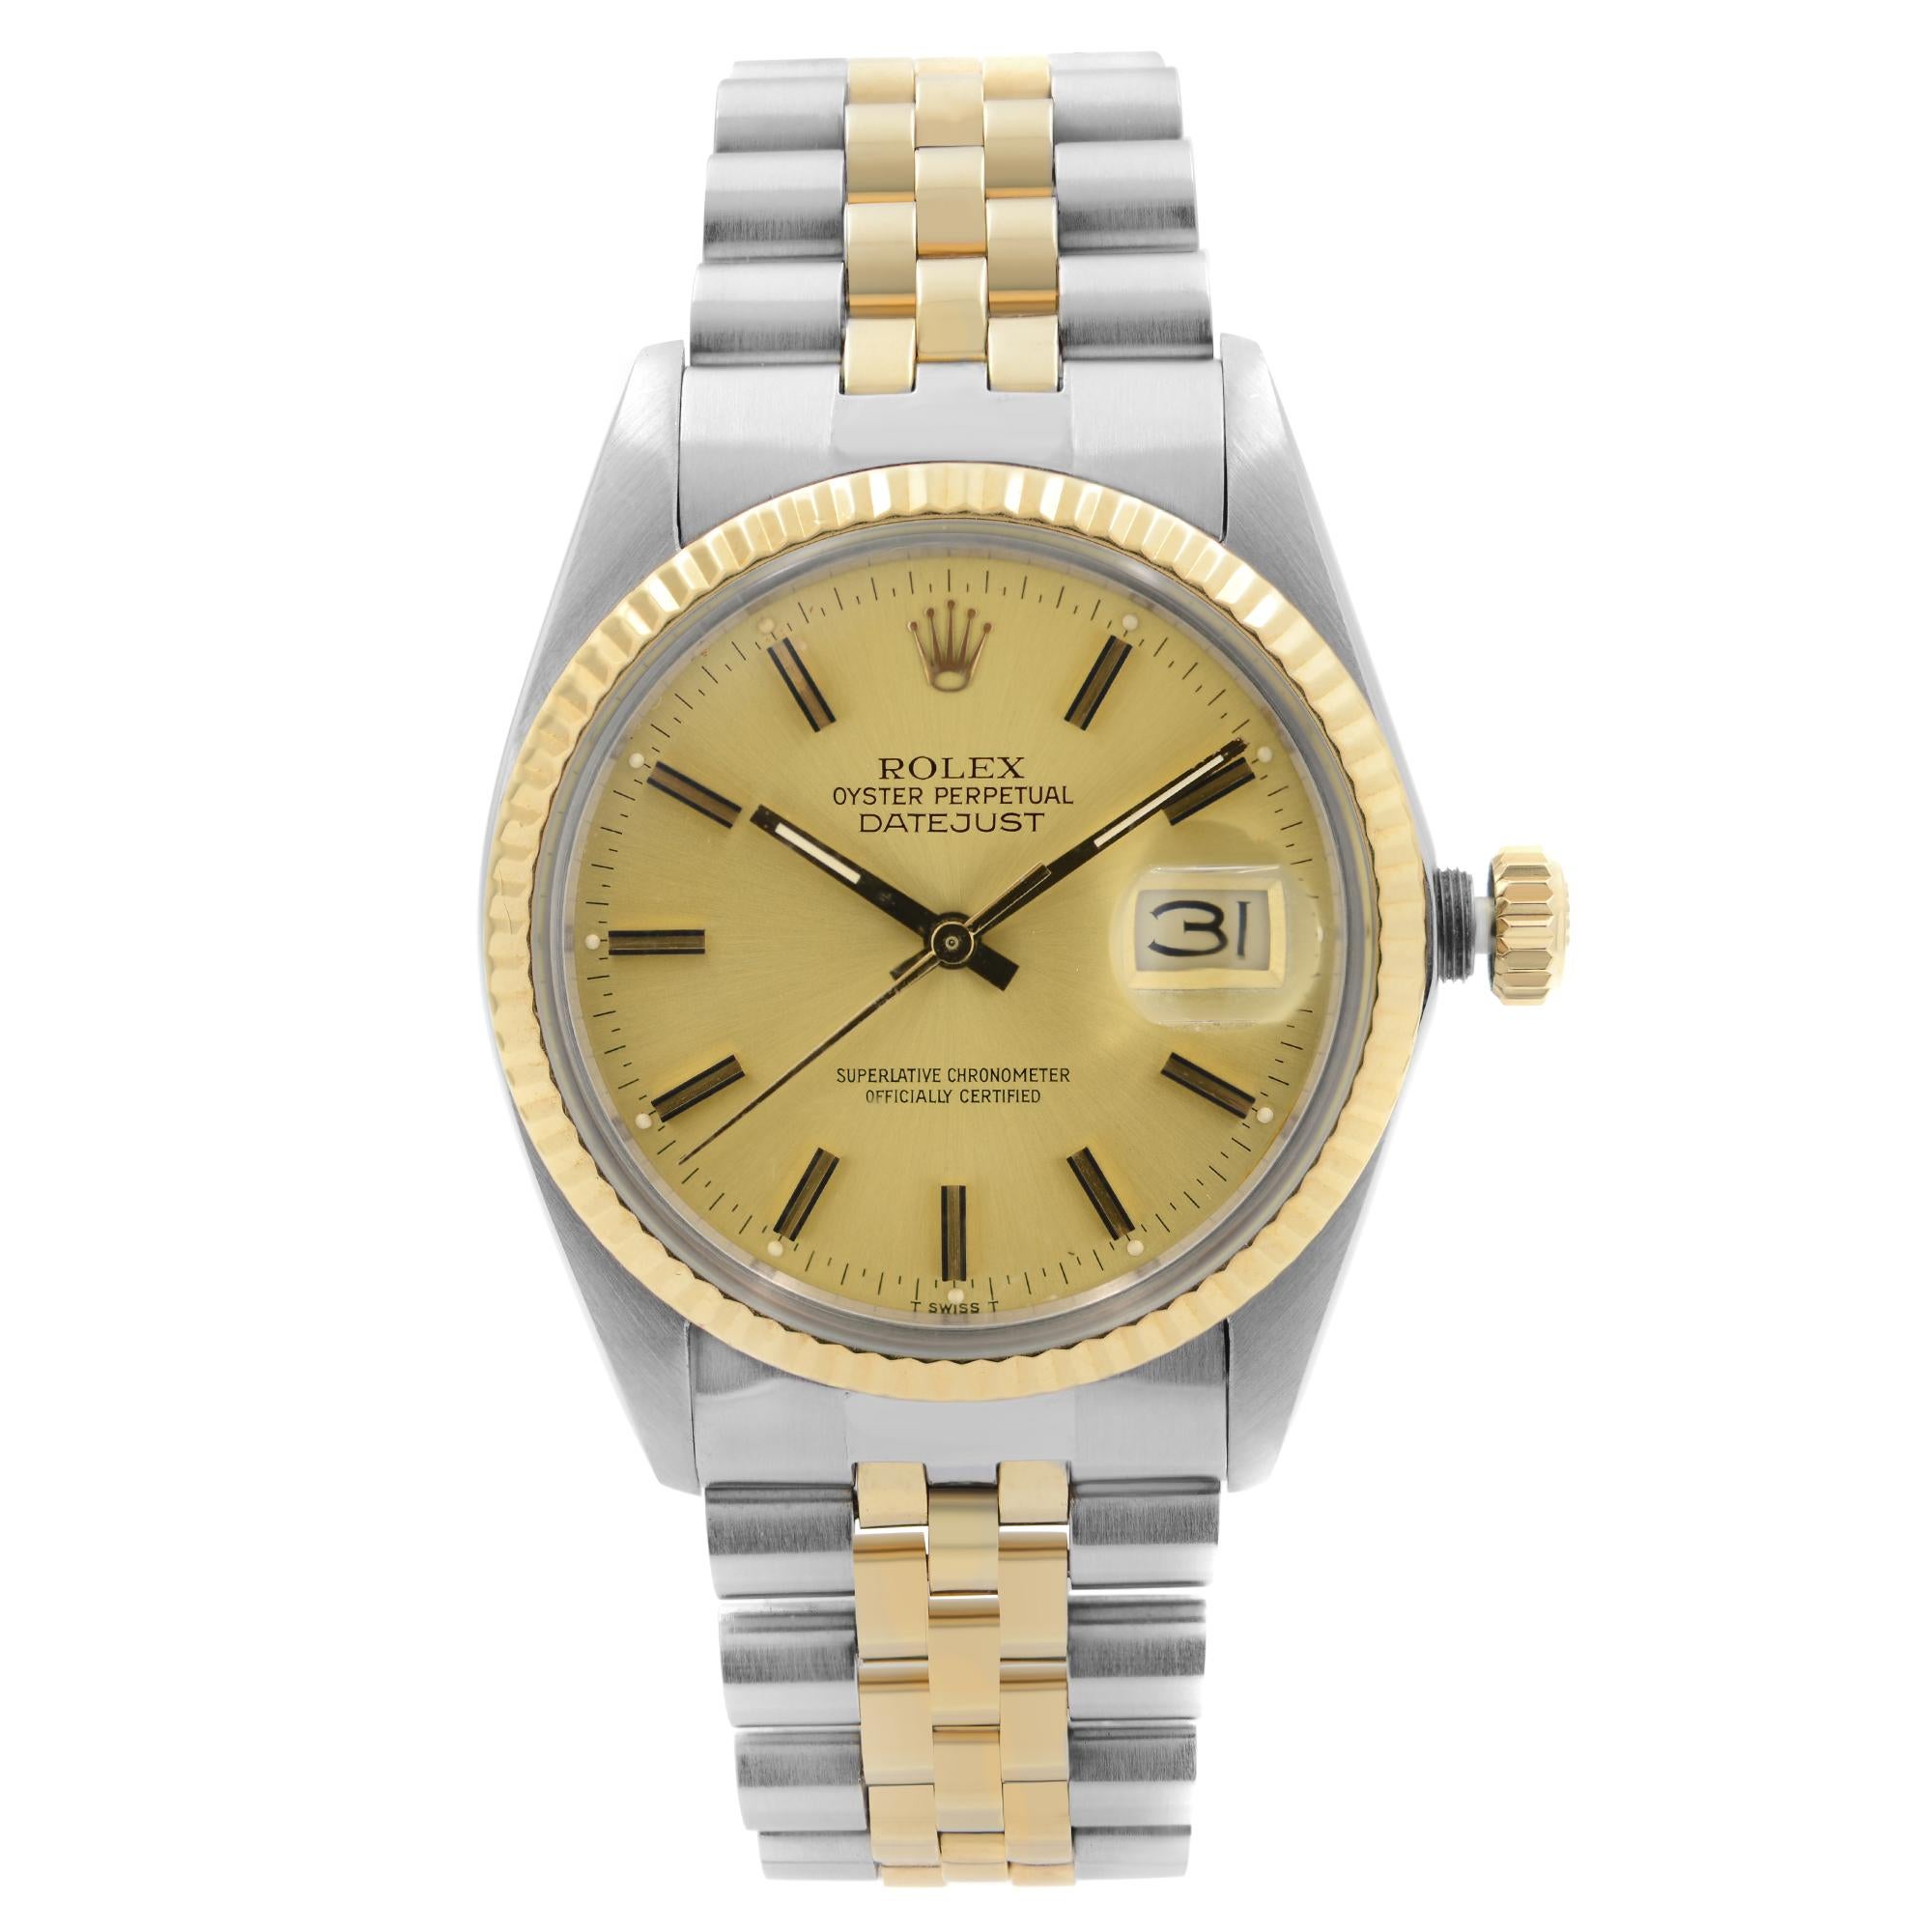 Rolex Datejust 18k Gold Steel Champagne Dial Automatic Mens Watch 16013